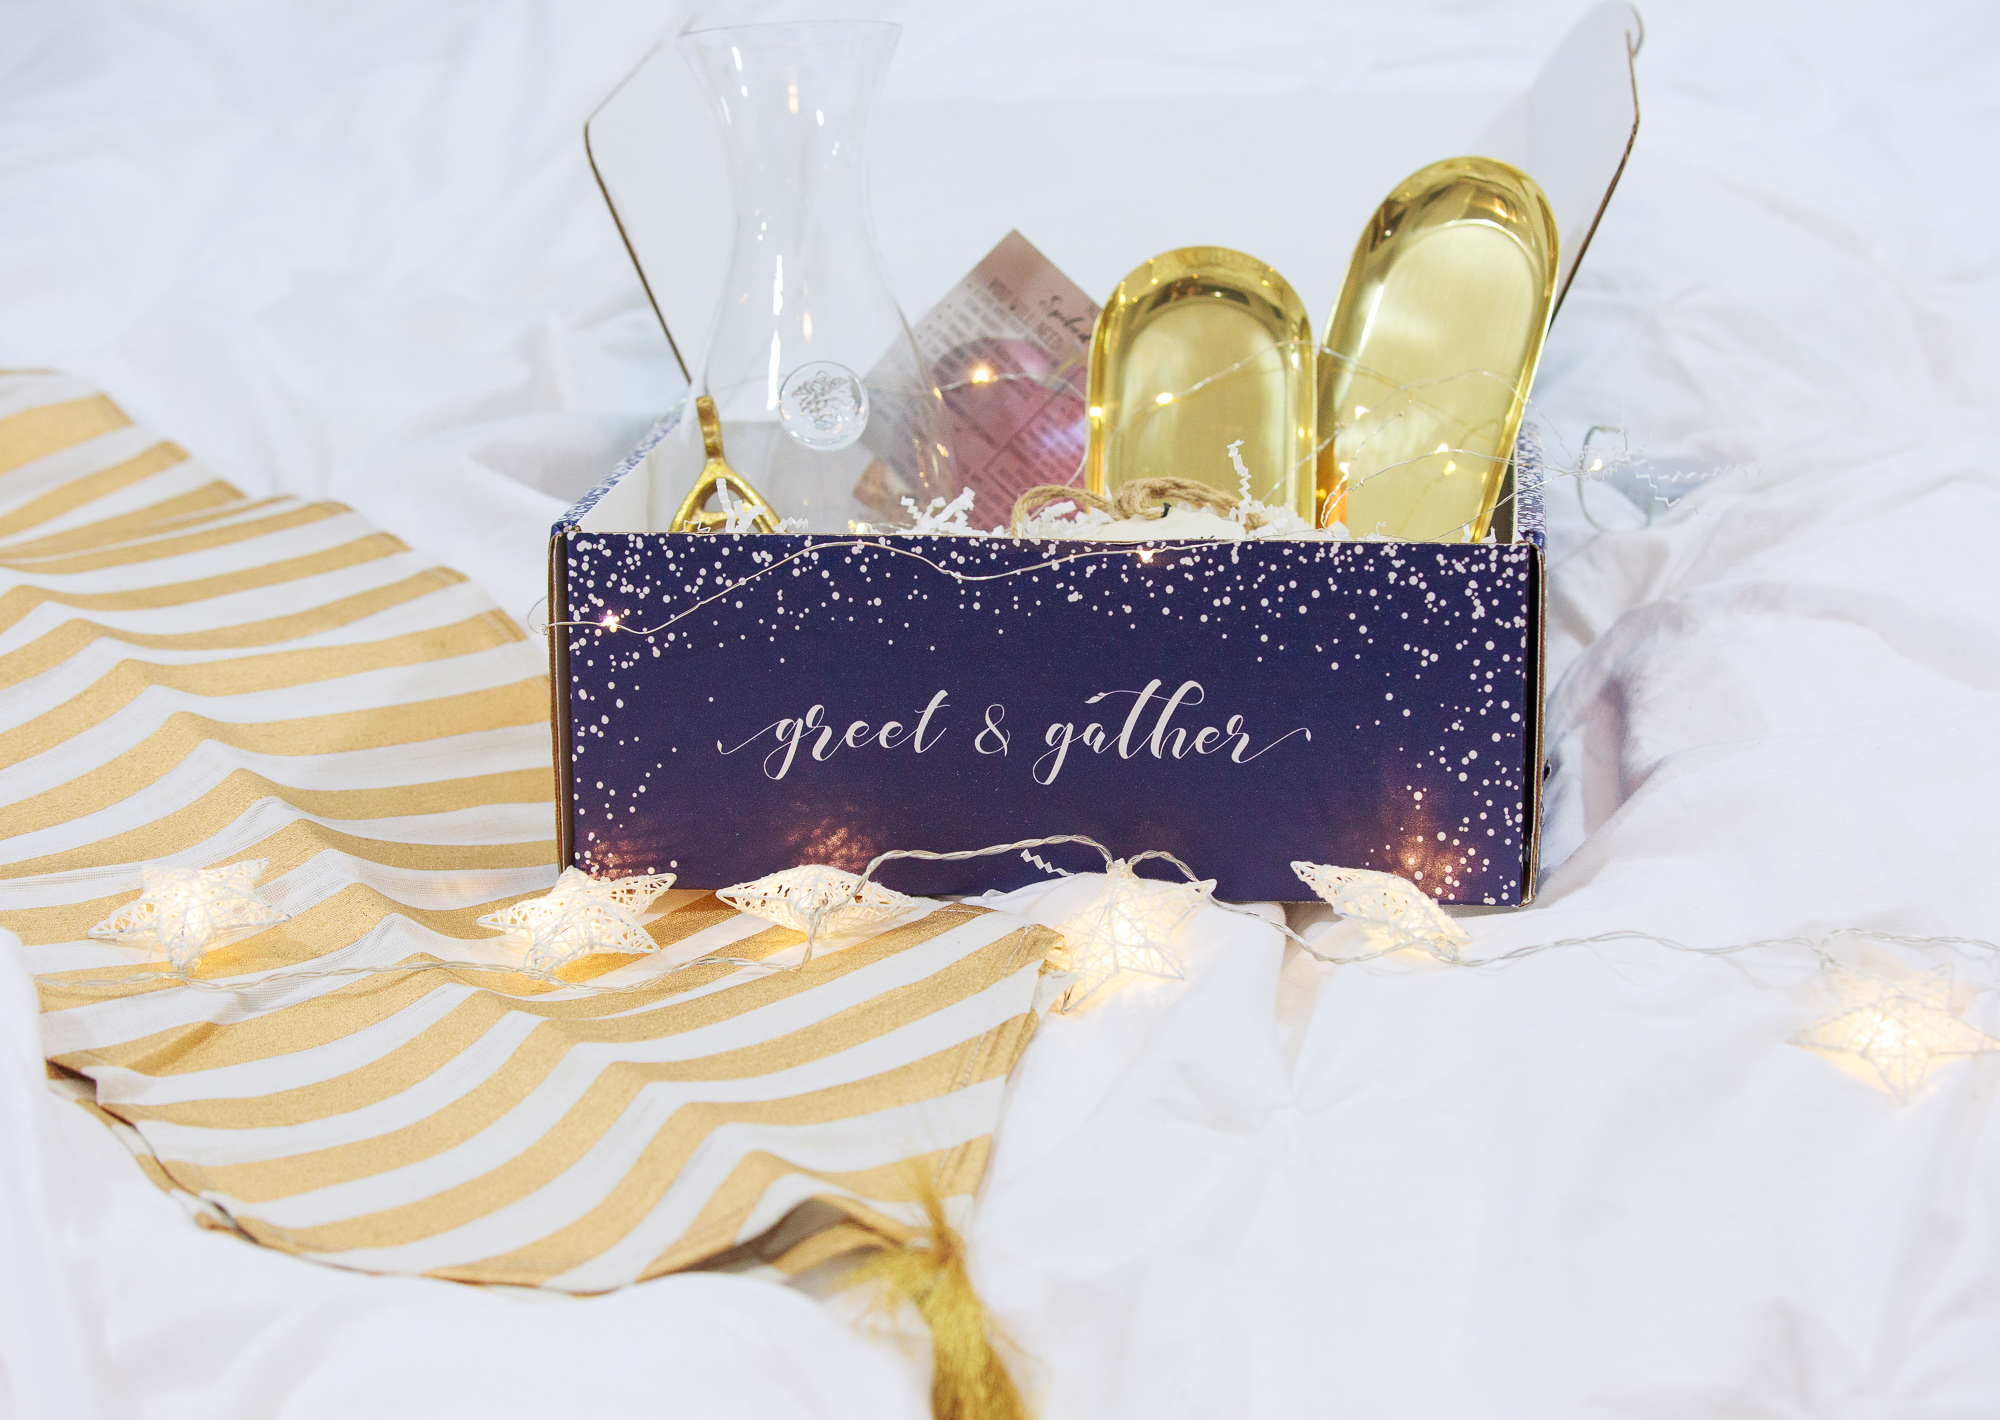 Greet & Gather Event, Party, and Special Occasion Subscription Service to help you host the perfect event! Unboxing by lifestyle and fashion blogger Jessica Linn on Linn Style